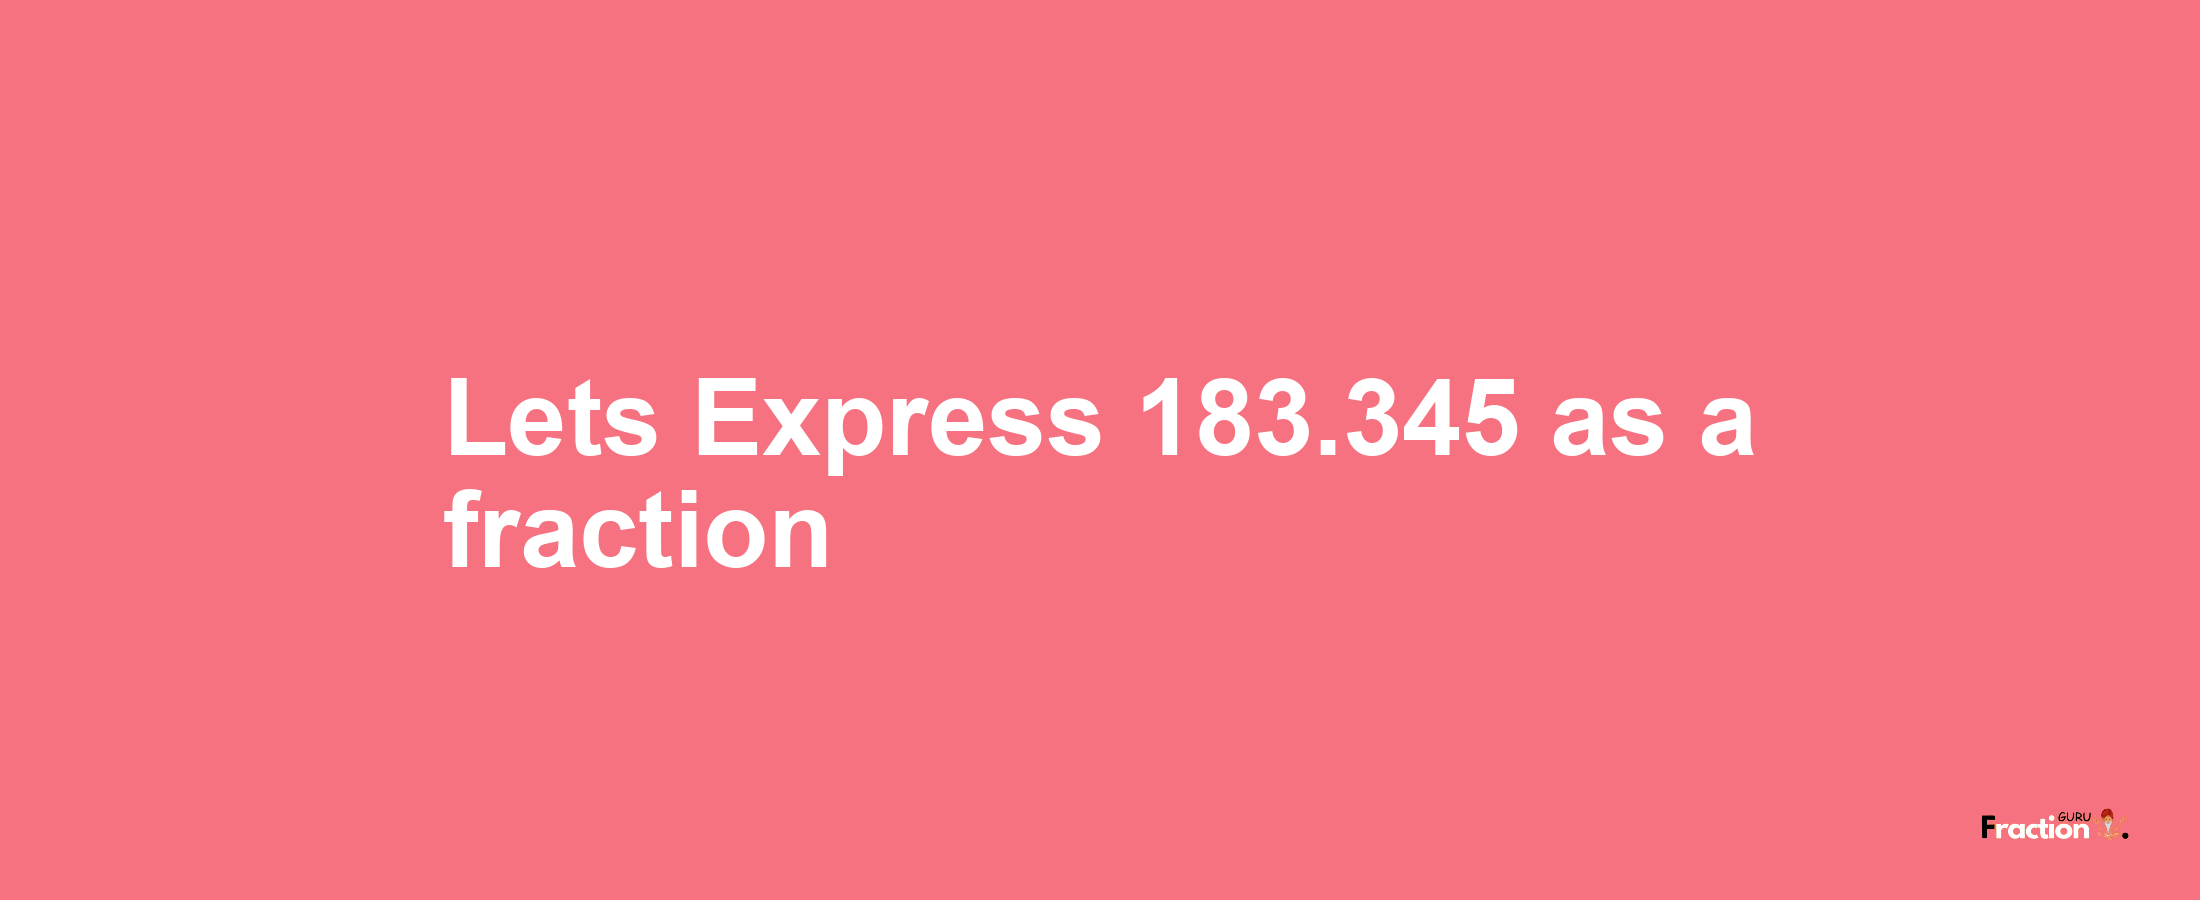 Lets Express 183.345 as afraction